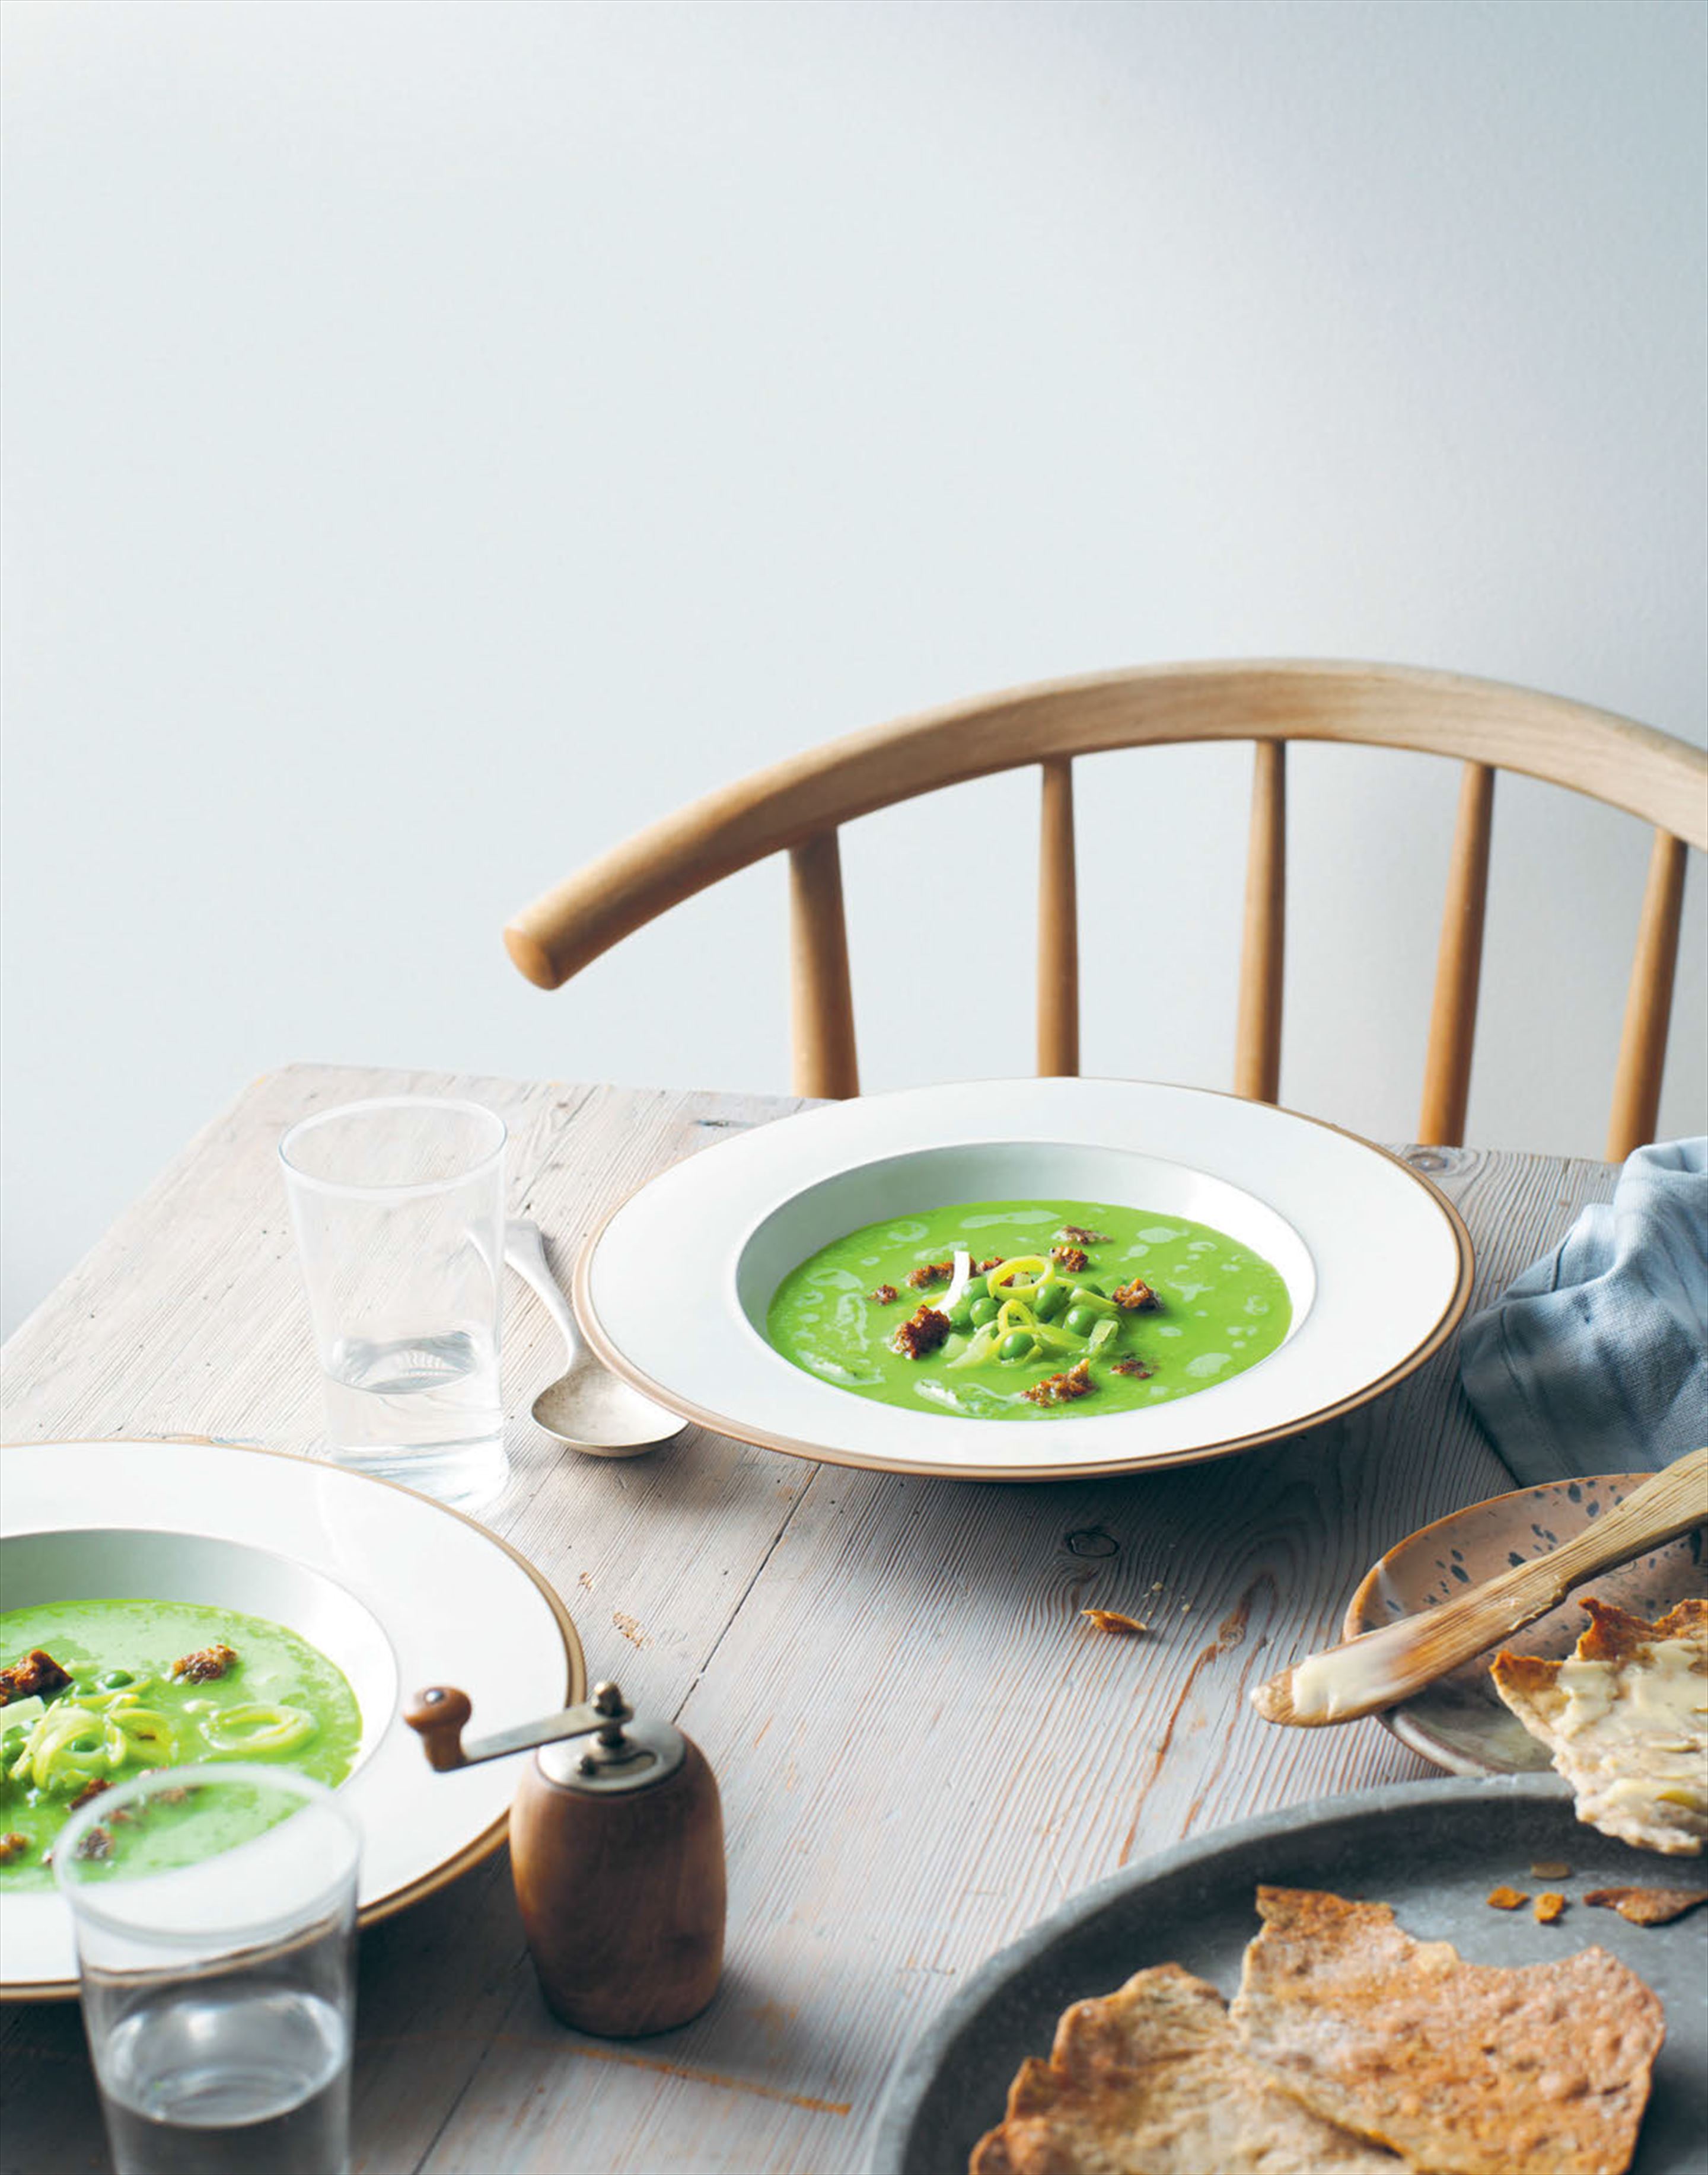 Chilled pea & dill soup with rye